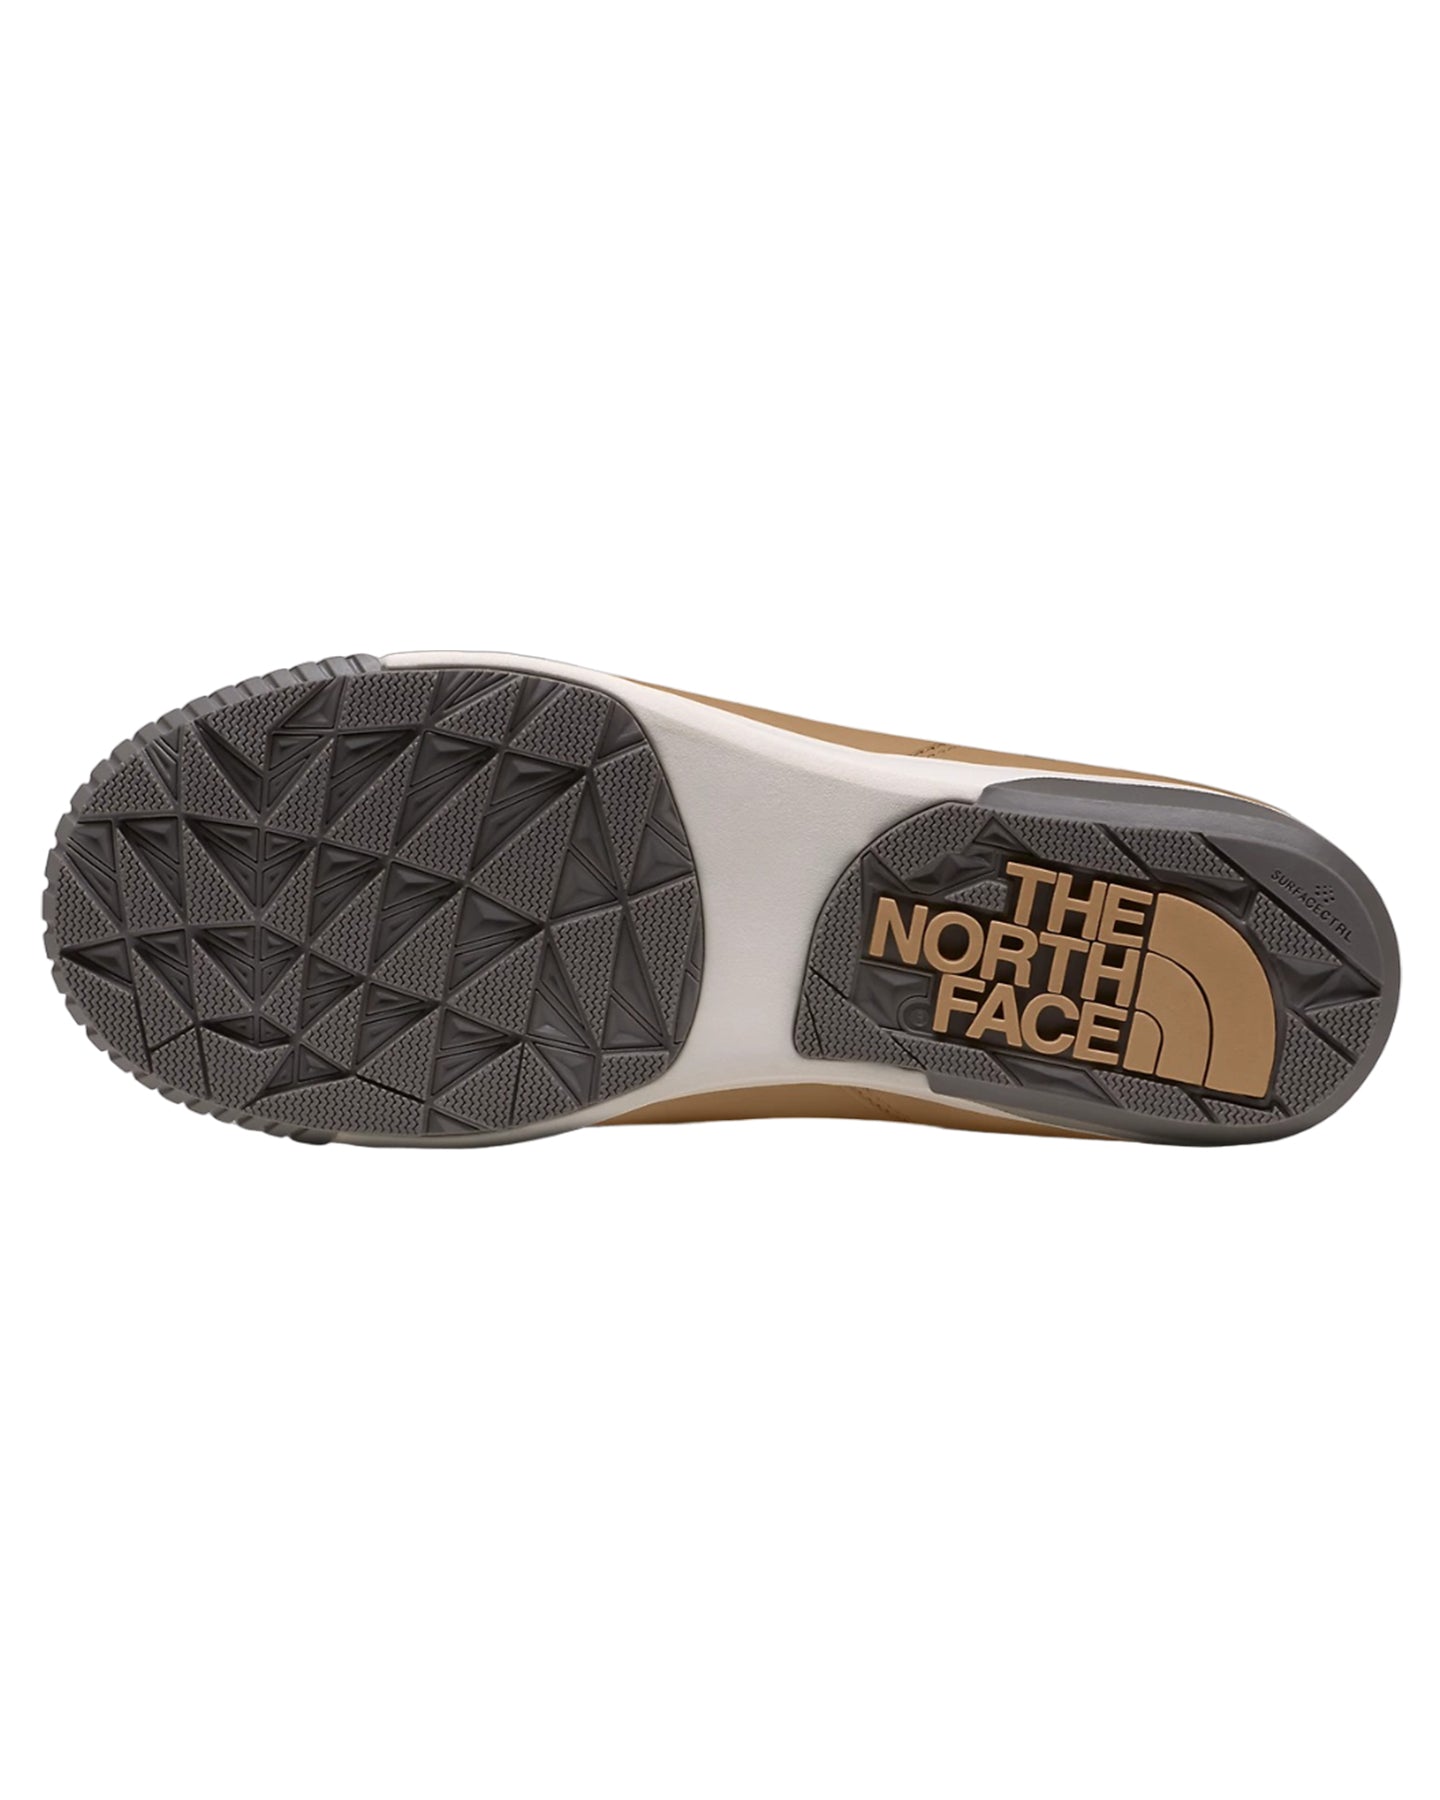 The North Face Women's Sierra Luxe Waterproof Apres Boots - Almond Butter/Falconbrown Apres Boots - SnowSkiersWarehouse